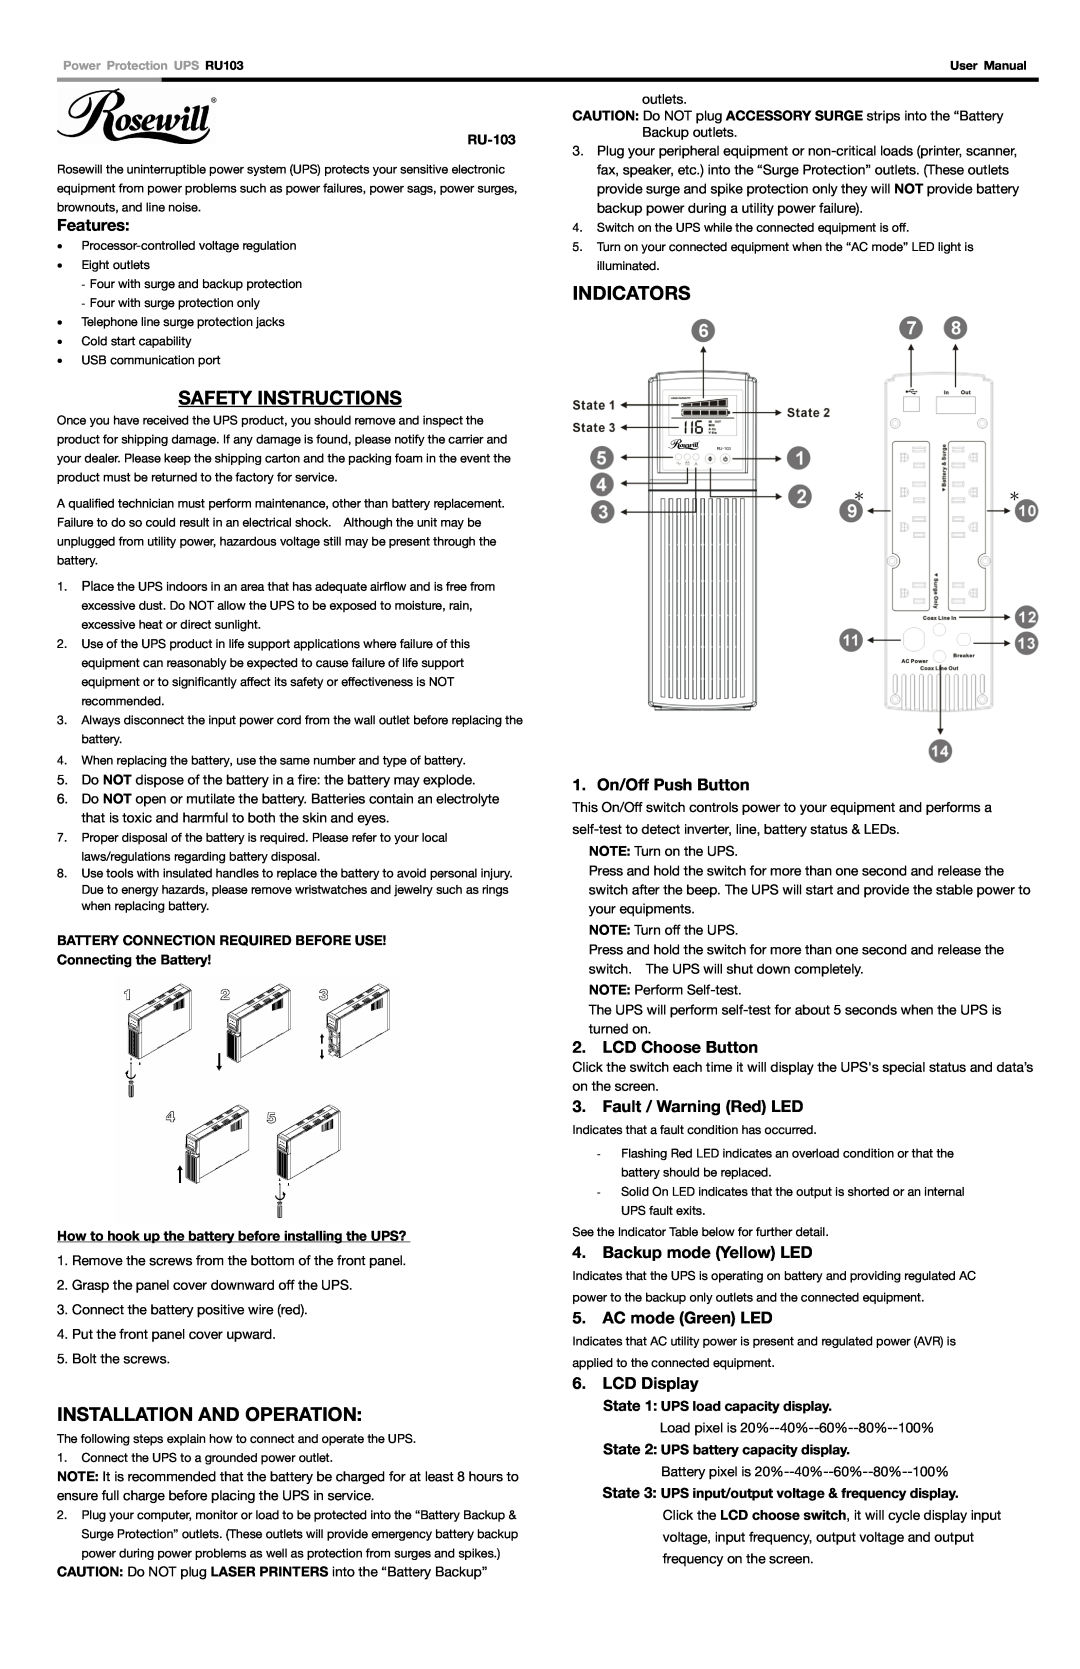 Rosewill RU-103 user manual Safety Instructions, Indicators, Installation And Operation, Features, 1. On/Off Push Button 